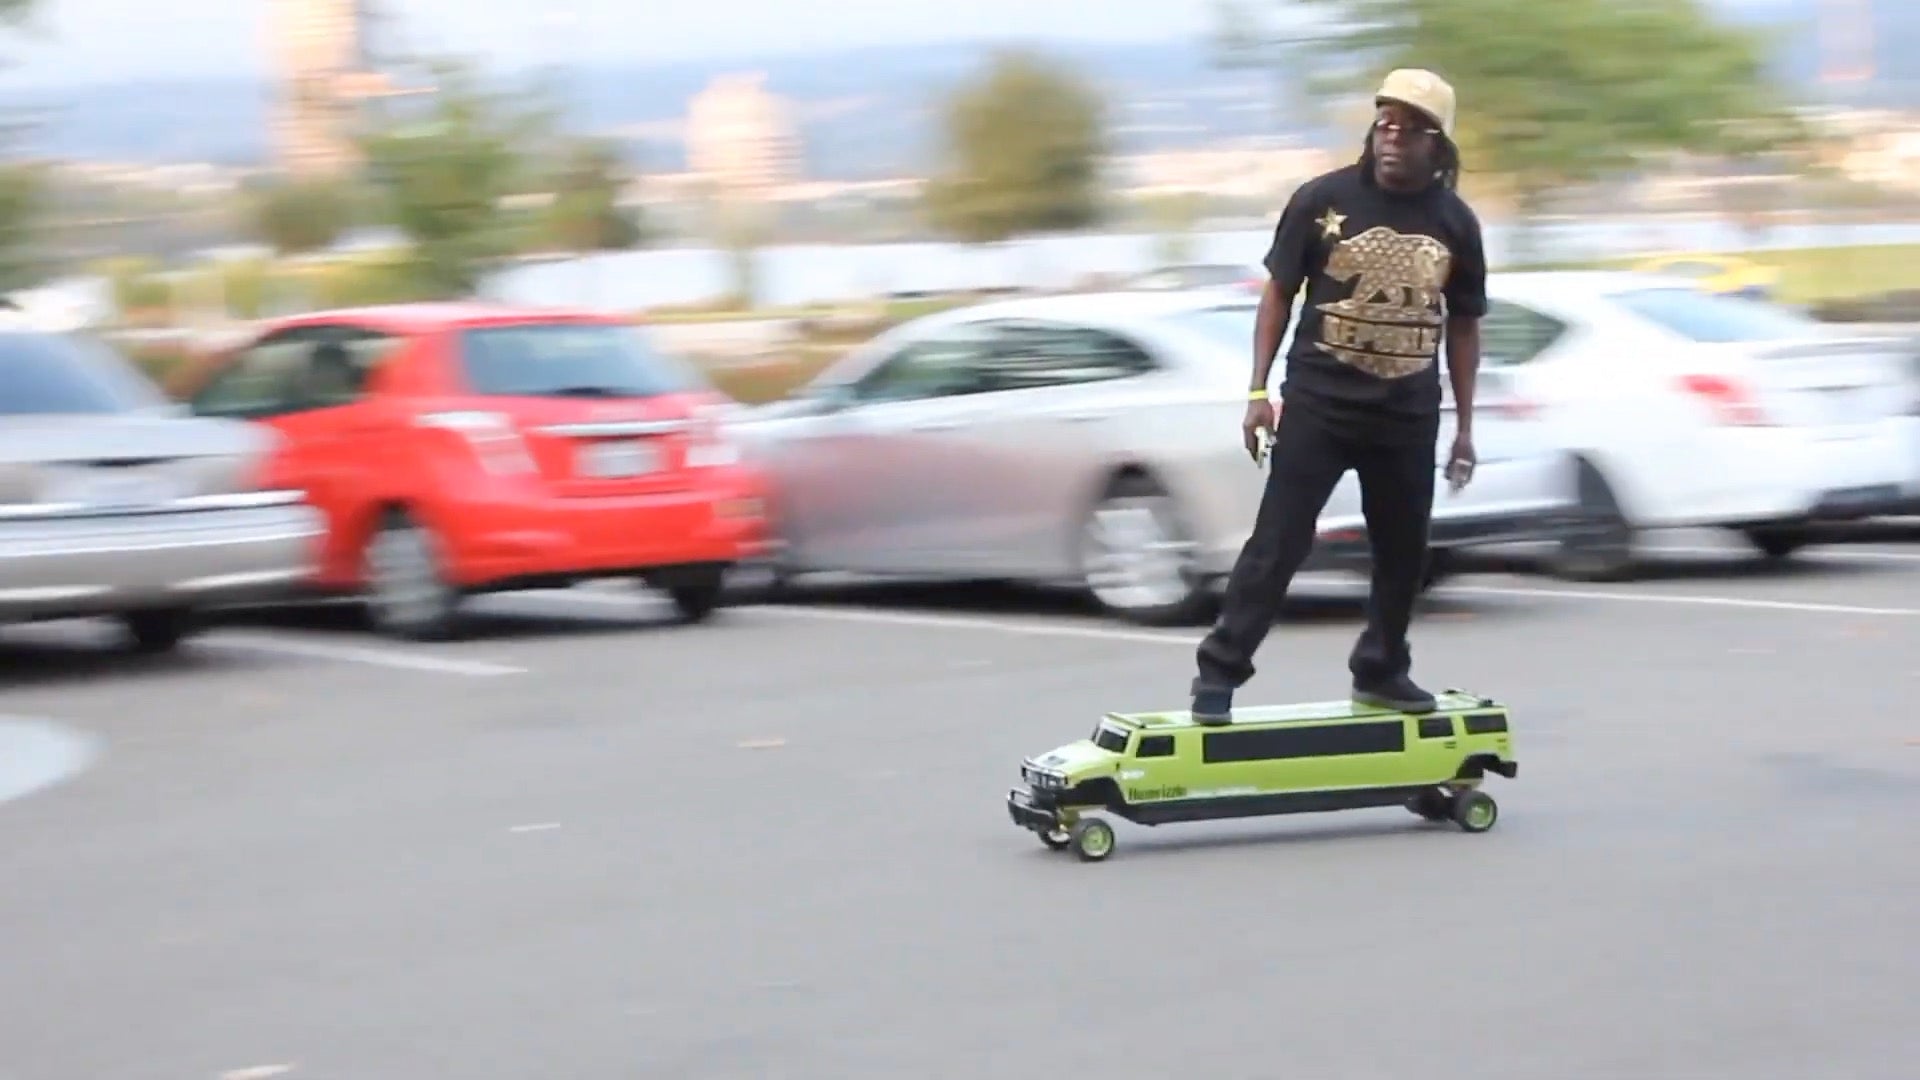 Darren Powell, founder of FreeJac Nation, riding the Humvizzle Scraperboard which is a bespoke luxury electric skateboard that looks like an exotic car